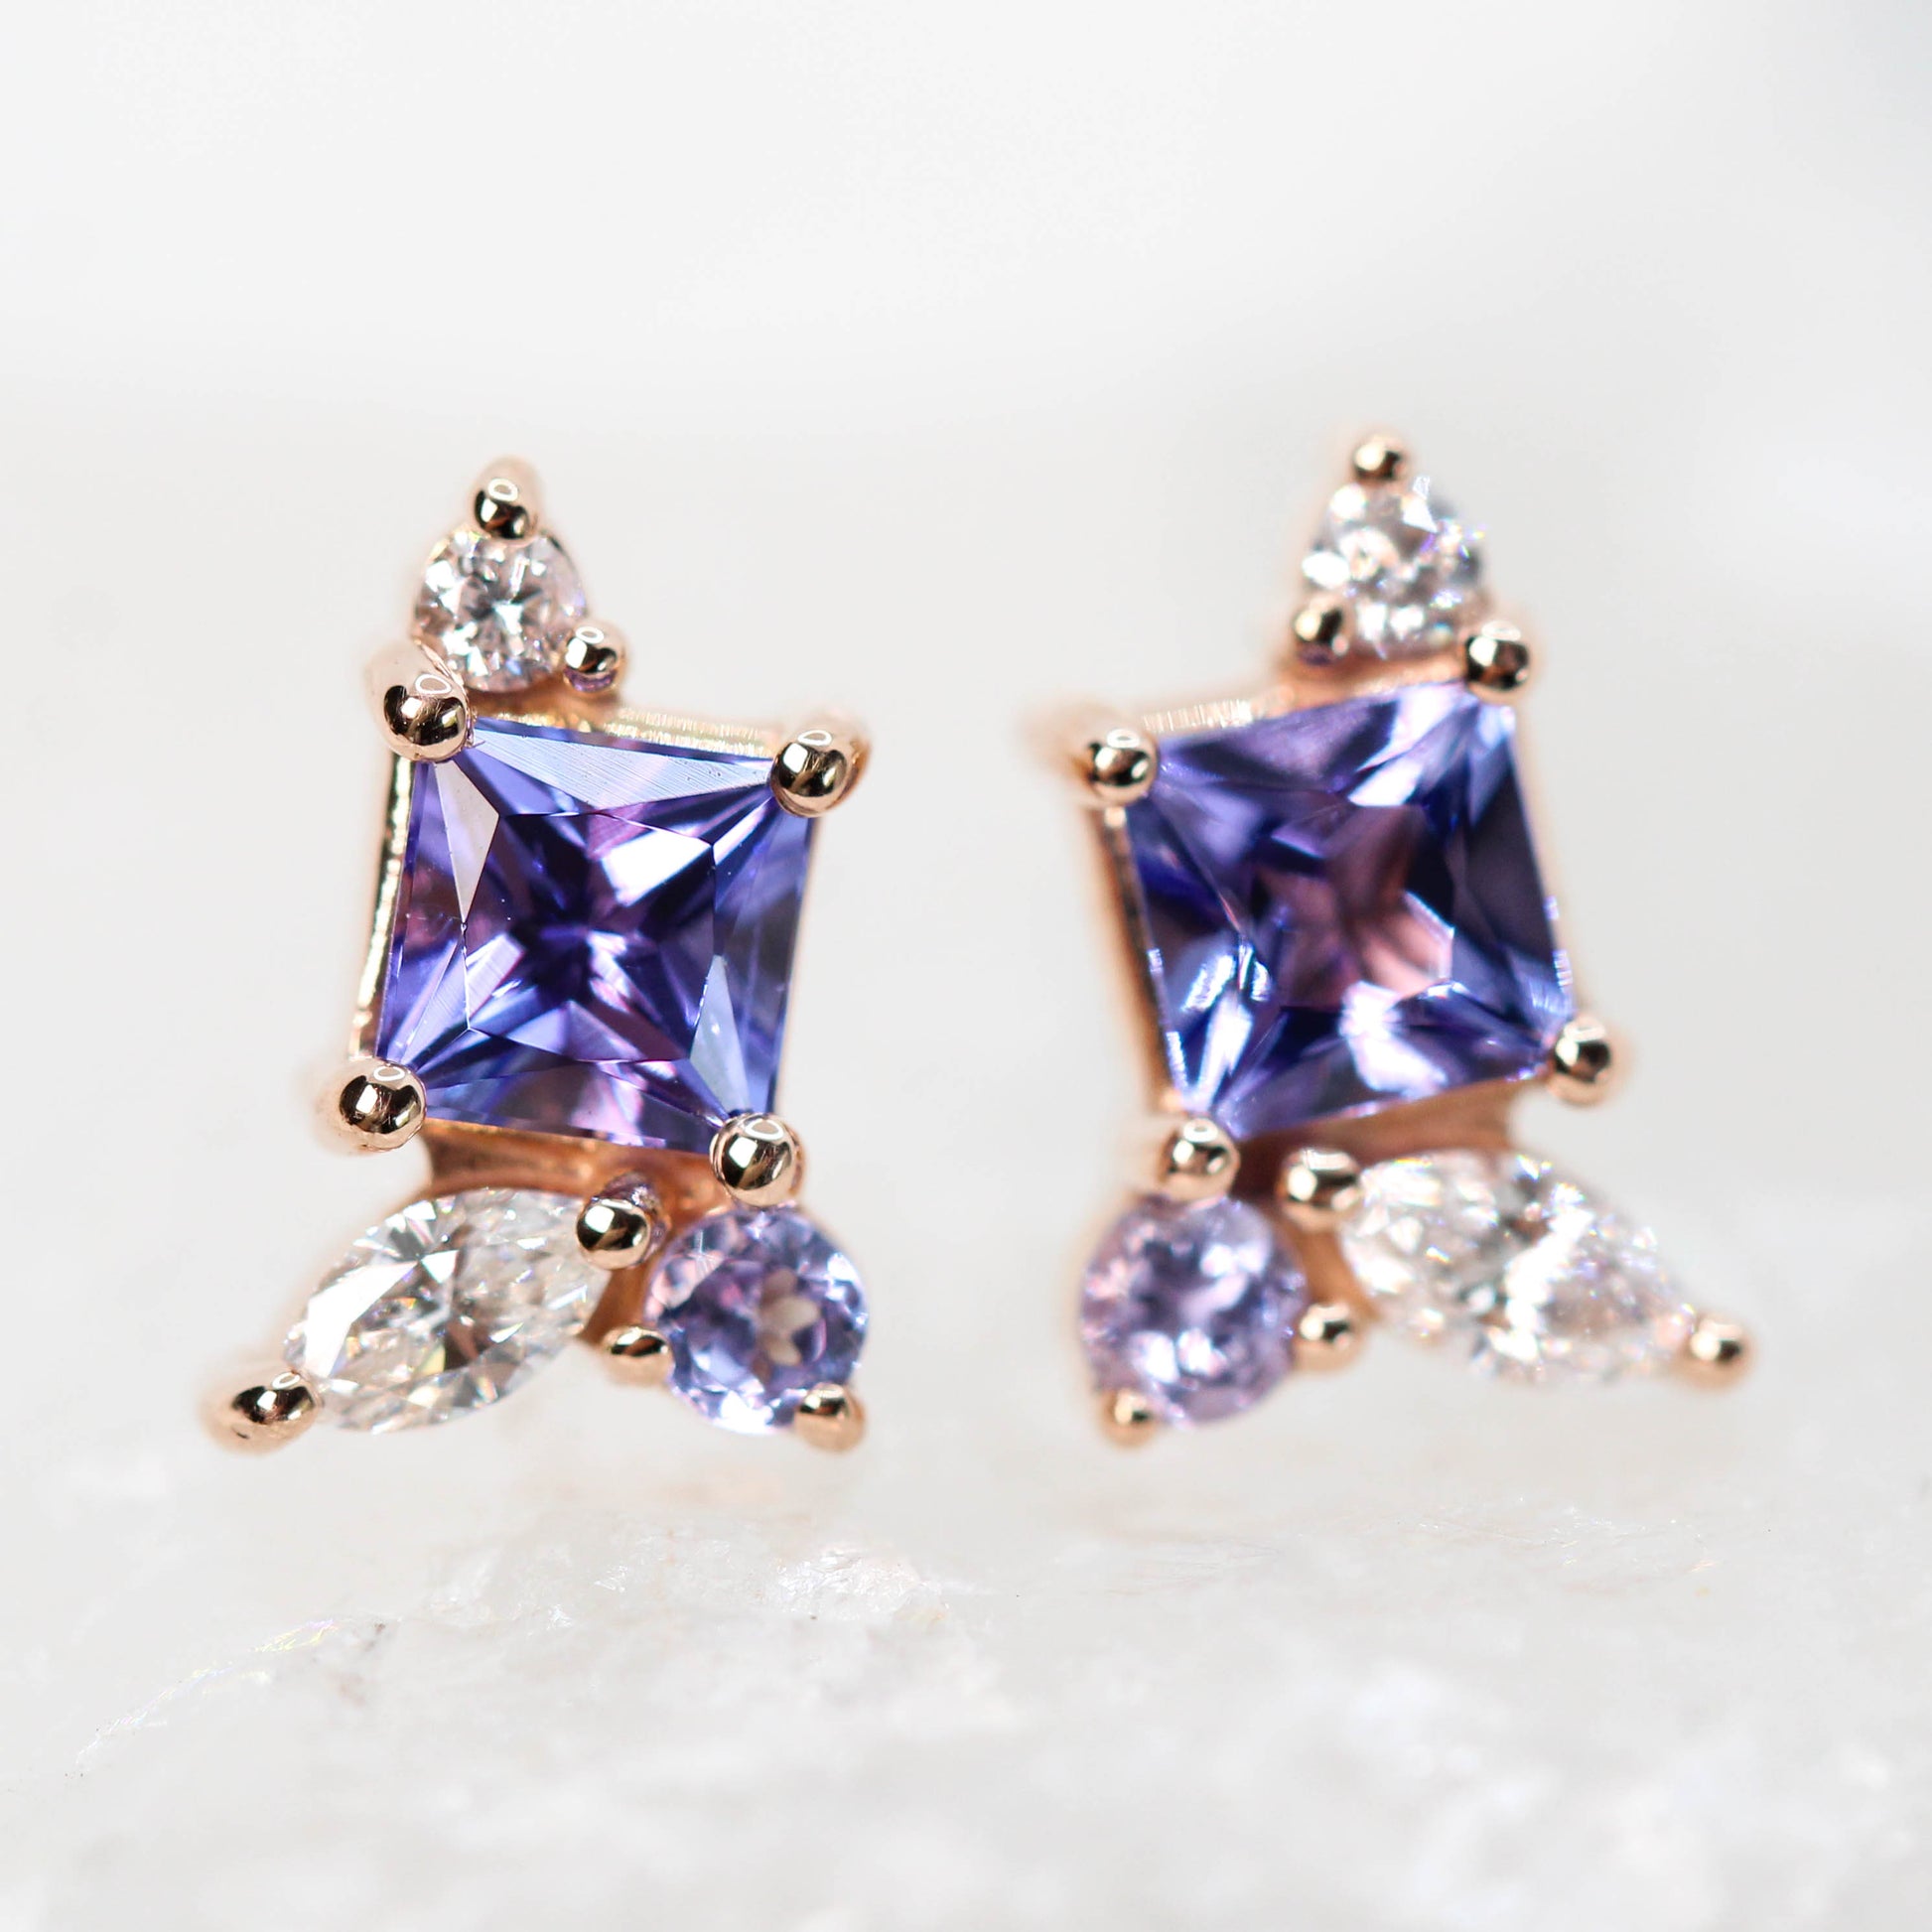 (SB) Princess Cut Tanzanite Earrings with Tanzanite and Diamond Accents - Made to Order, Your Choice of 14k Gold - Midwinter Co. Alternative Bridal Rings and Modern Fine Jewelry